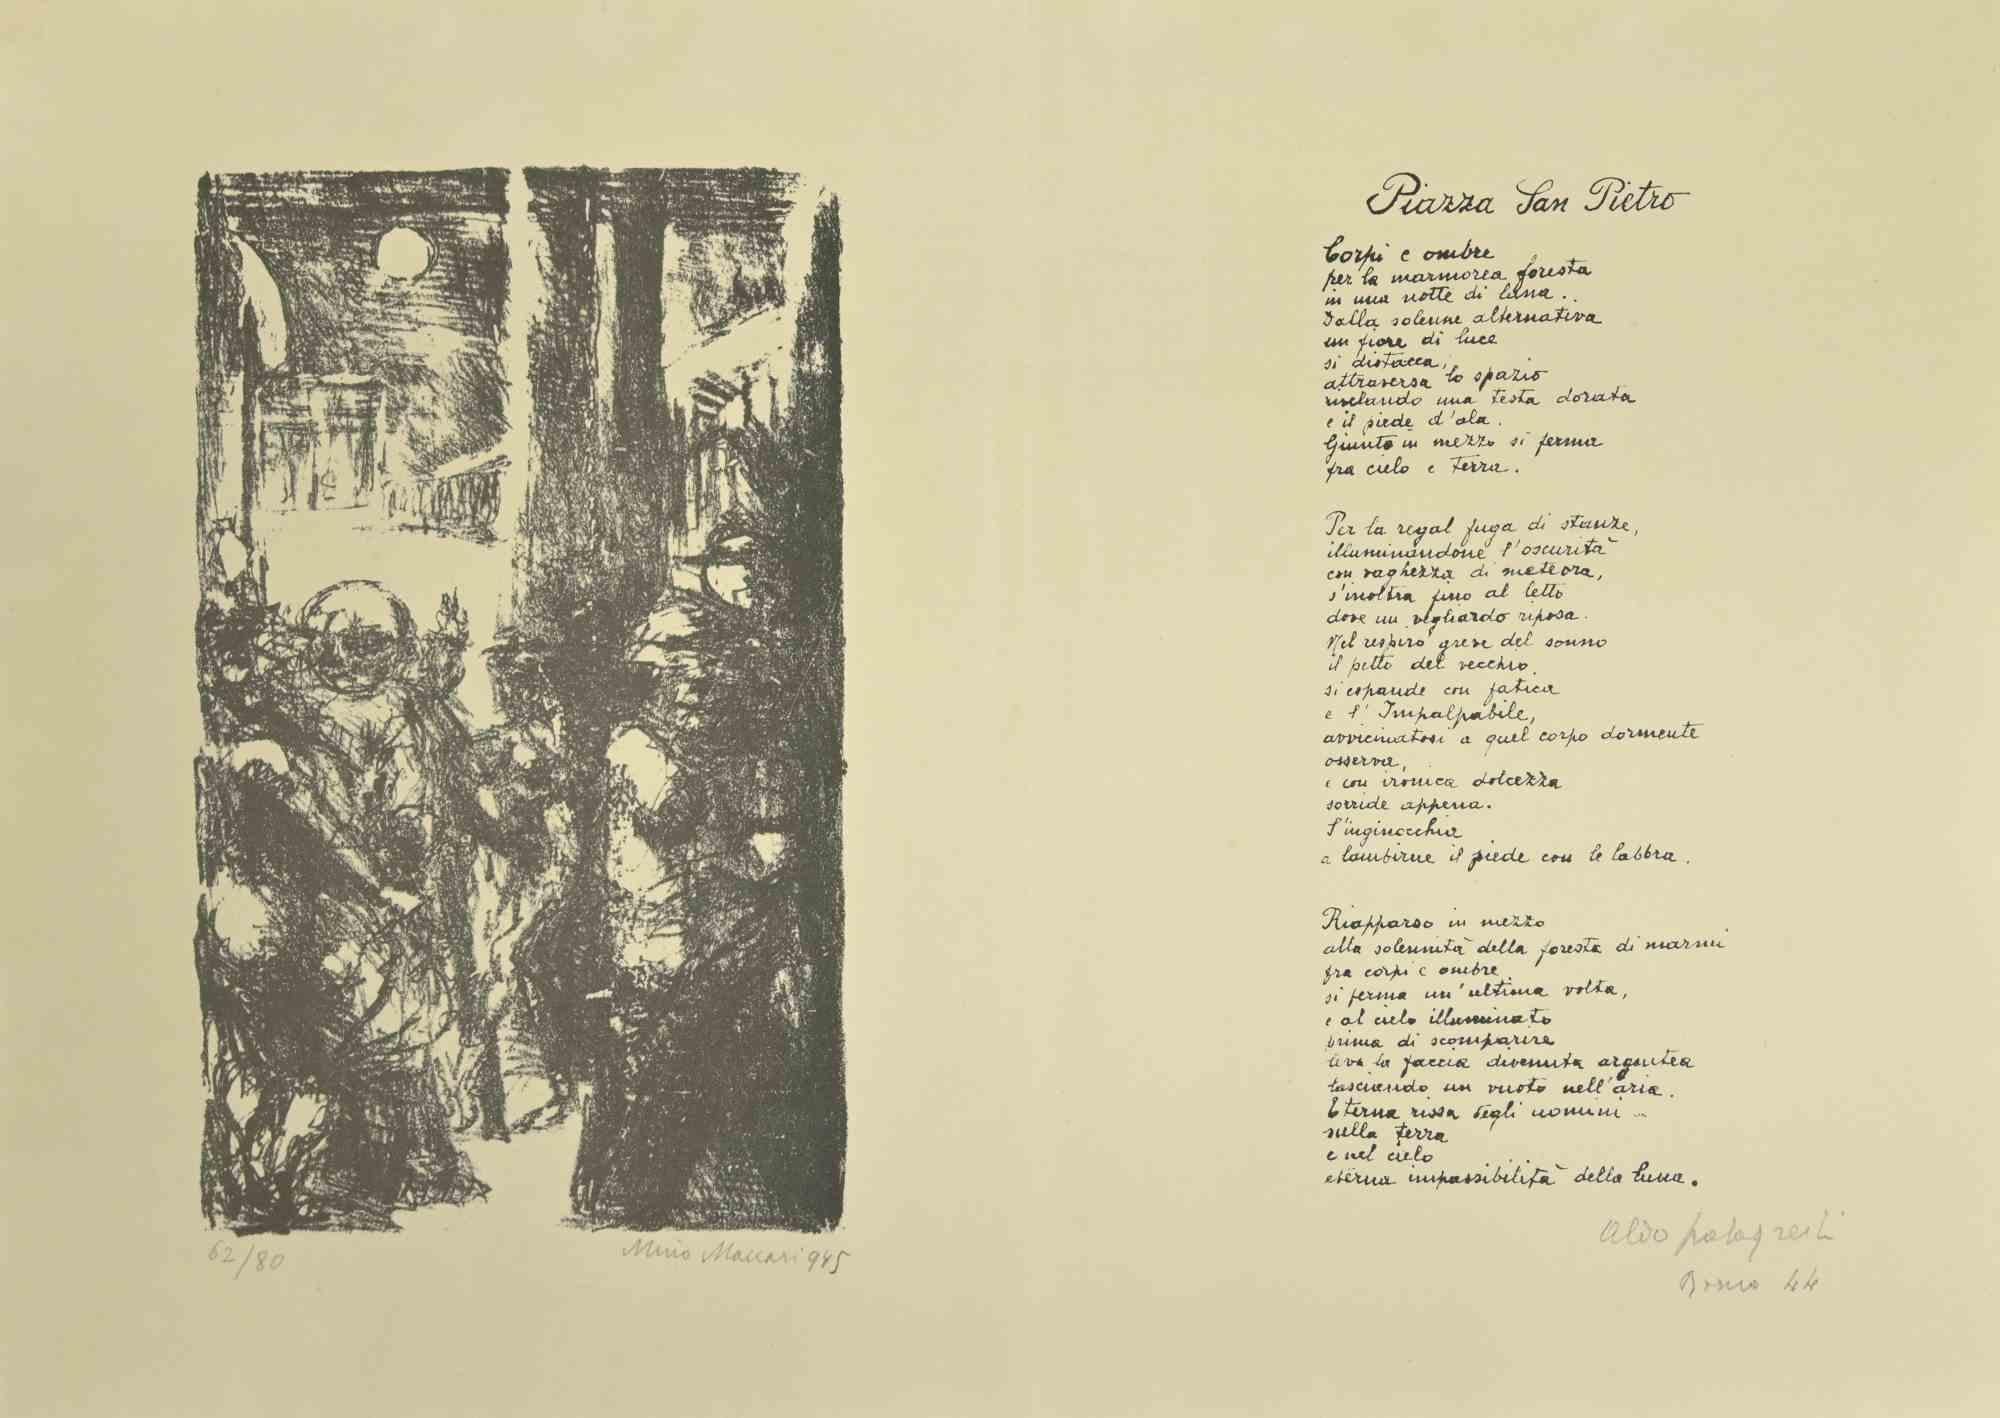 Piazza San Pietro is a modern artwork realized by Mino Maccari, Aldo Palazzeschi in 1944-1945.

Black and white lithograph realized by Maccari and a poem written by Aldo Palazzeschi in Italian on the second page.

The lithograph is numbered, edition